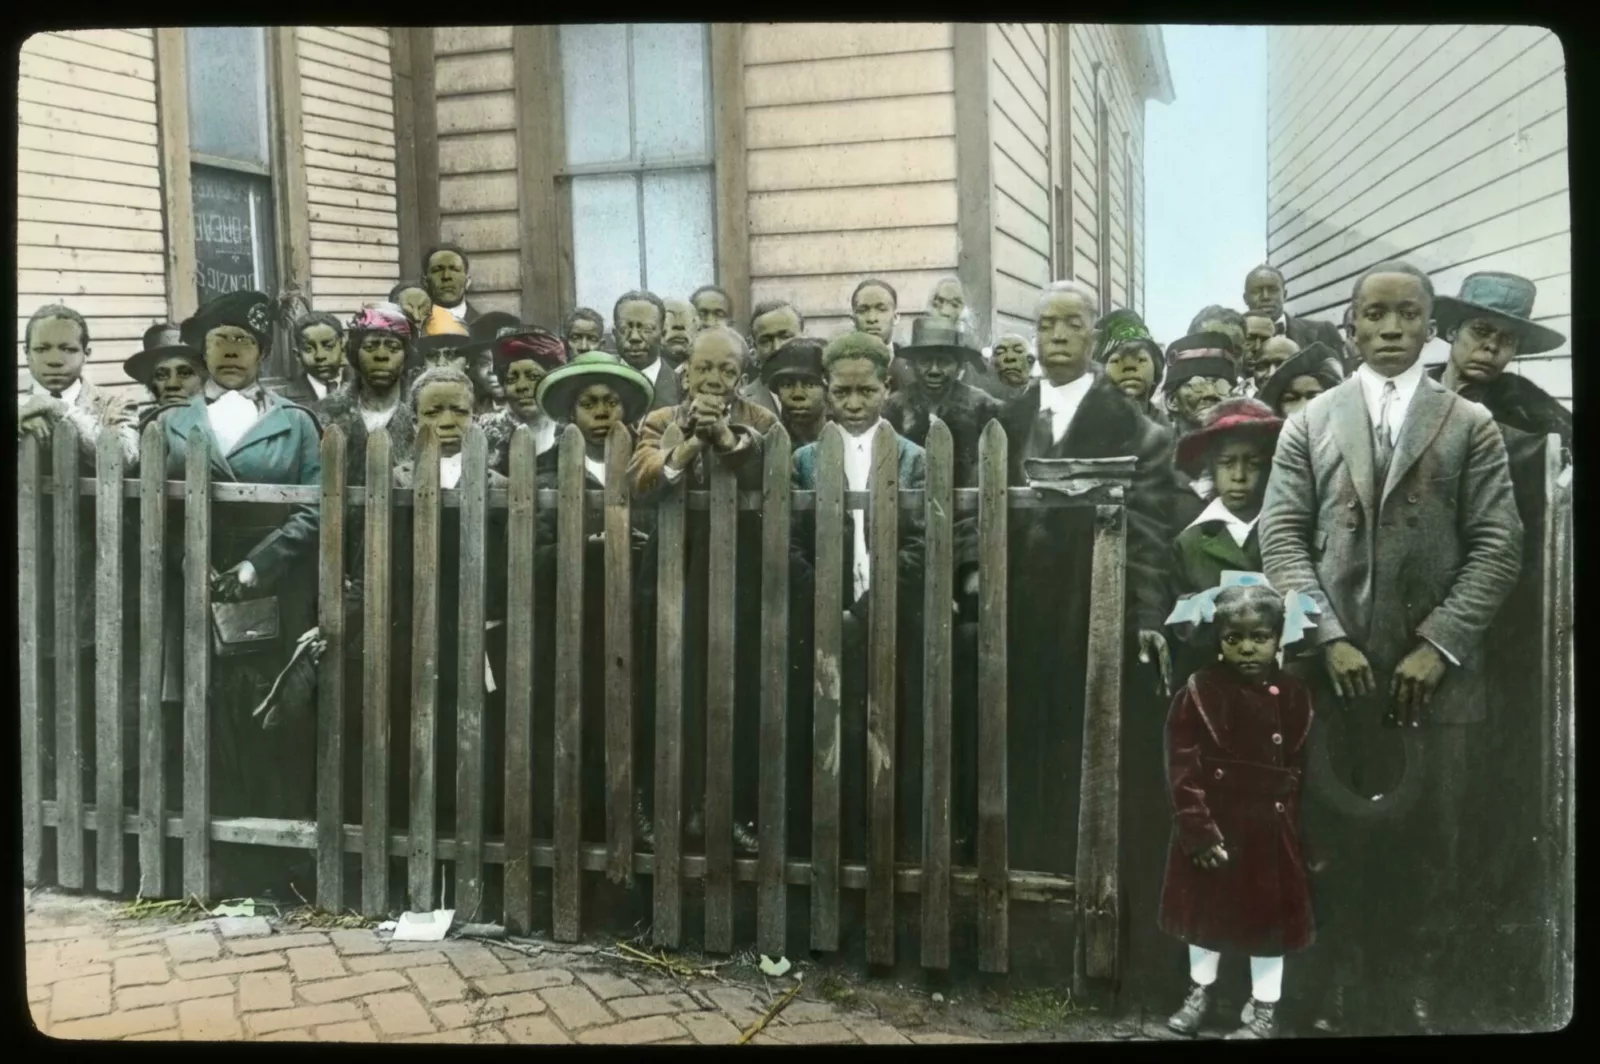 A multi-generational group of people pose for a photo. Some of them are standing behind a wooden picket fence between two buildings.